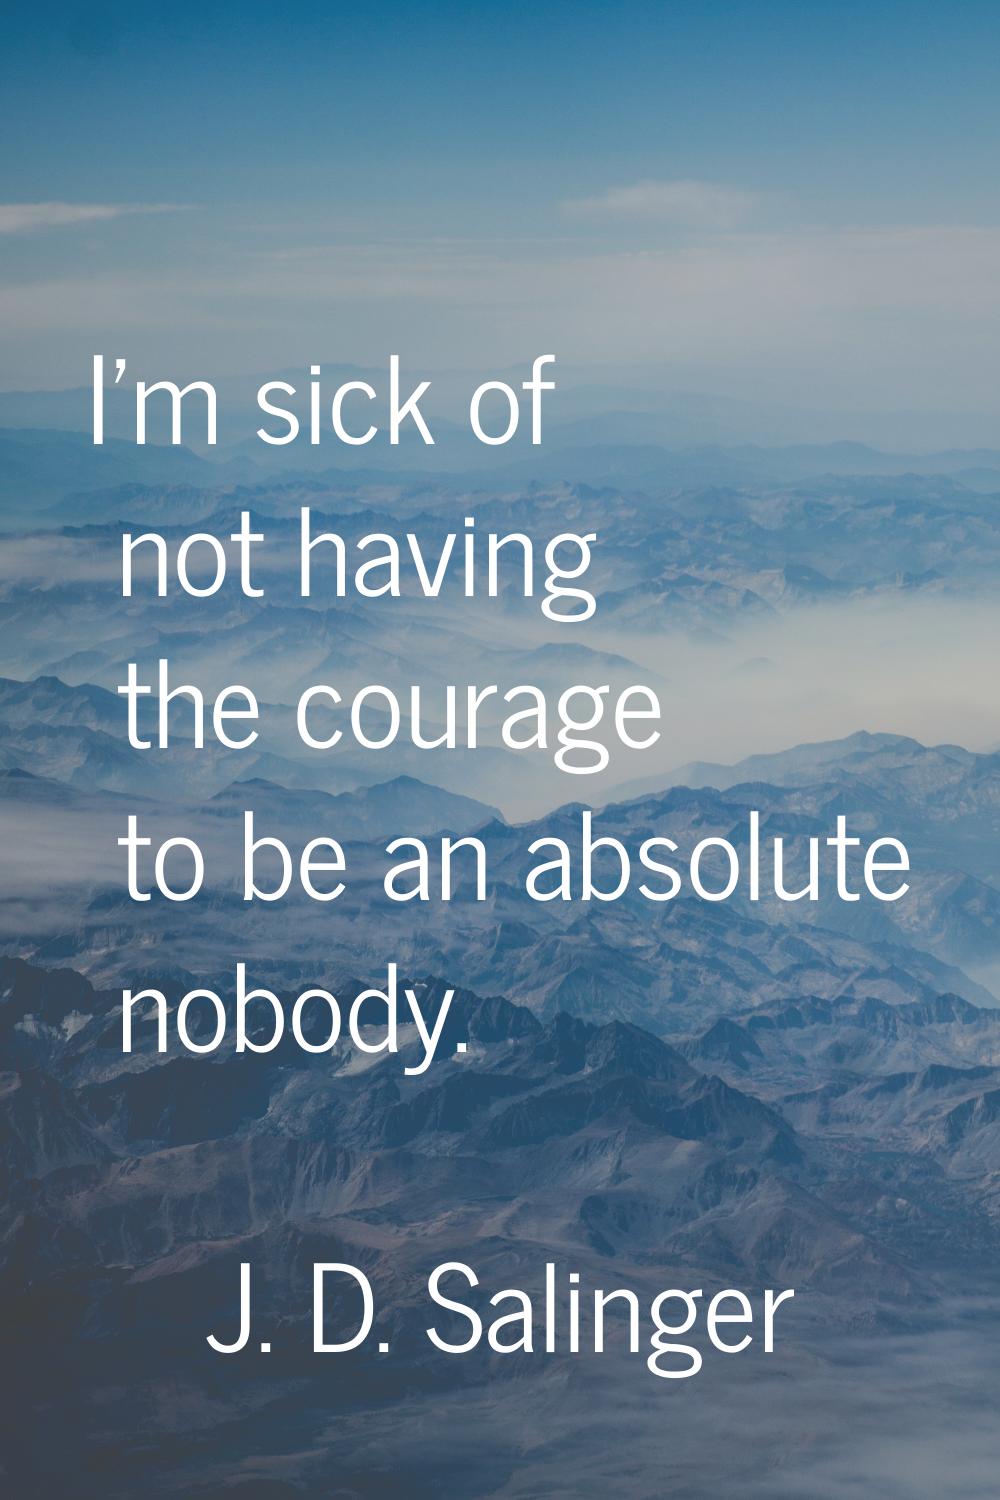 I'm sick of not having the courage to be an absolute nobody.